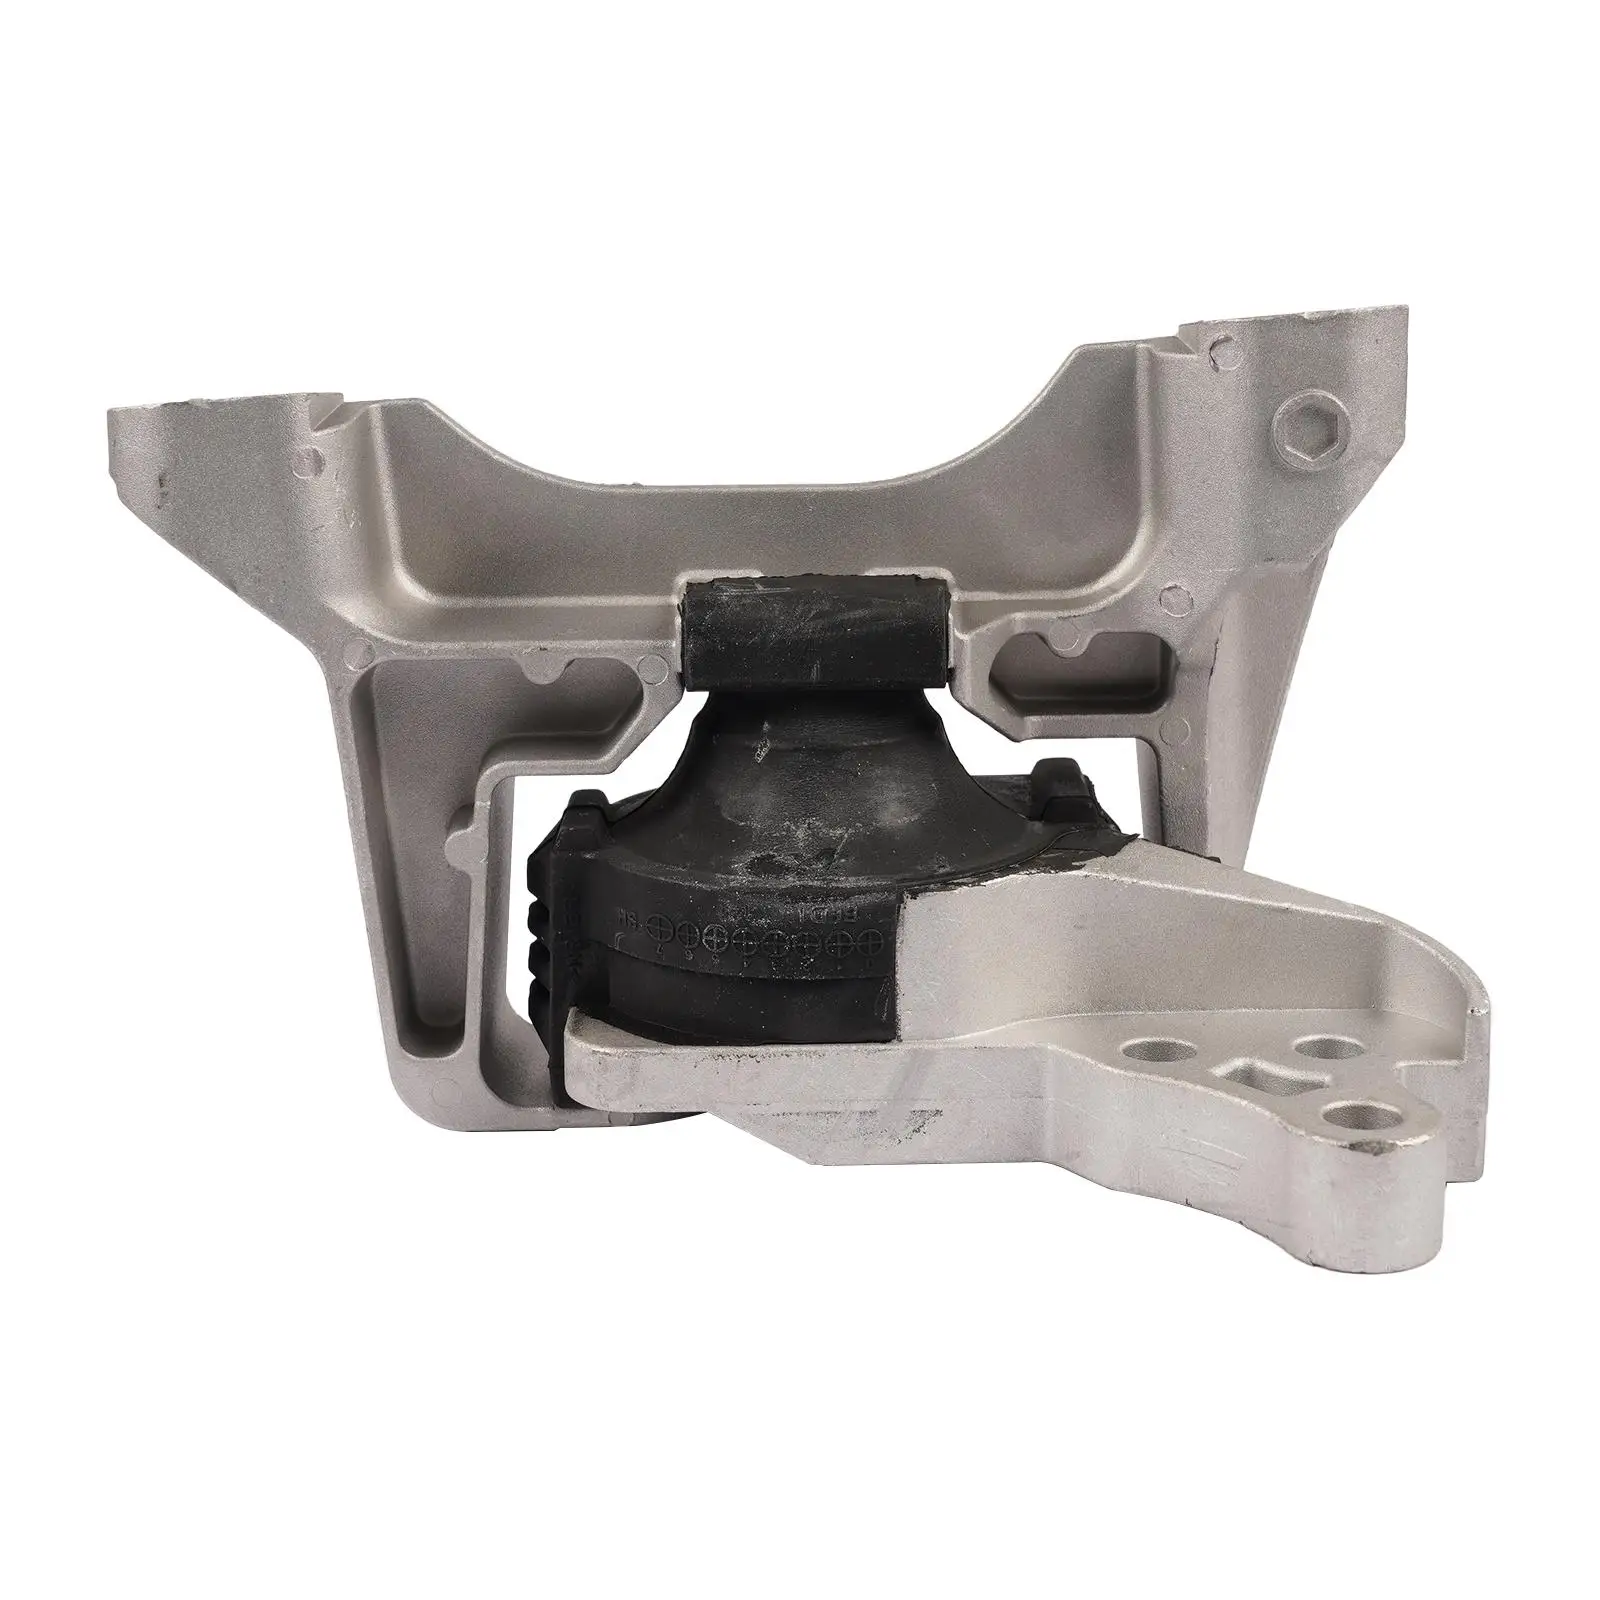 

AP01 BFD1-39-060B Right Engine Motor Mount For Mazda 3 / 3 Sport 2.0L 2.5L 2012-2013 BFD139060B